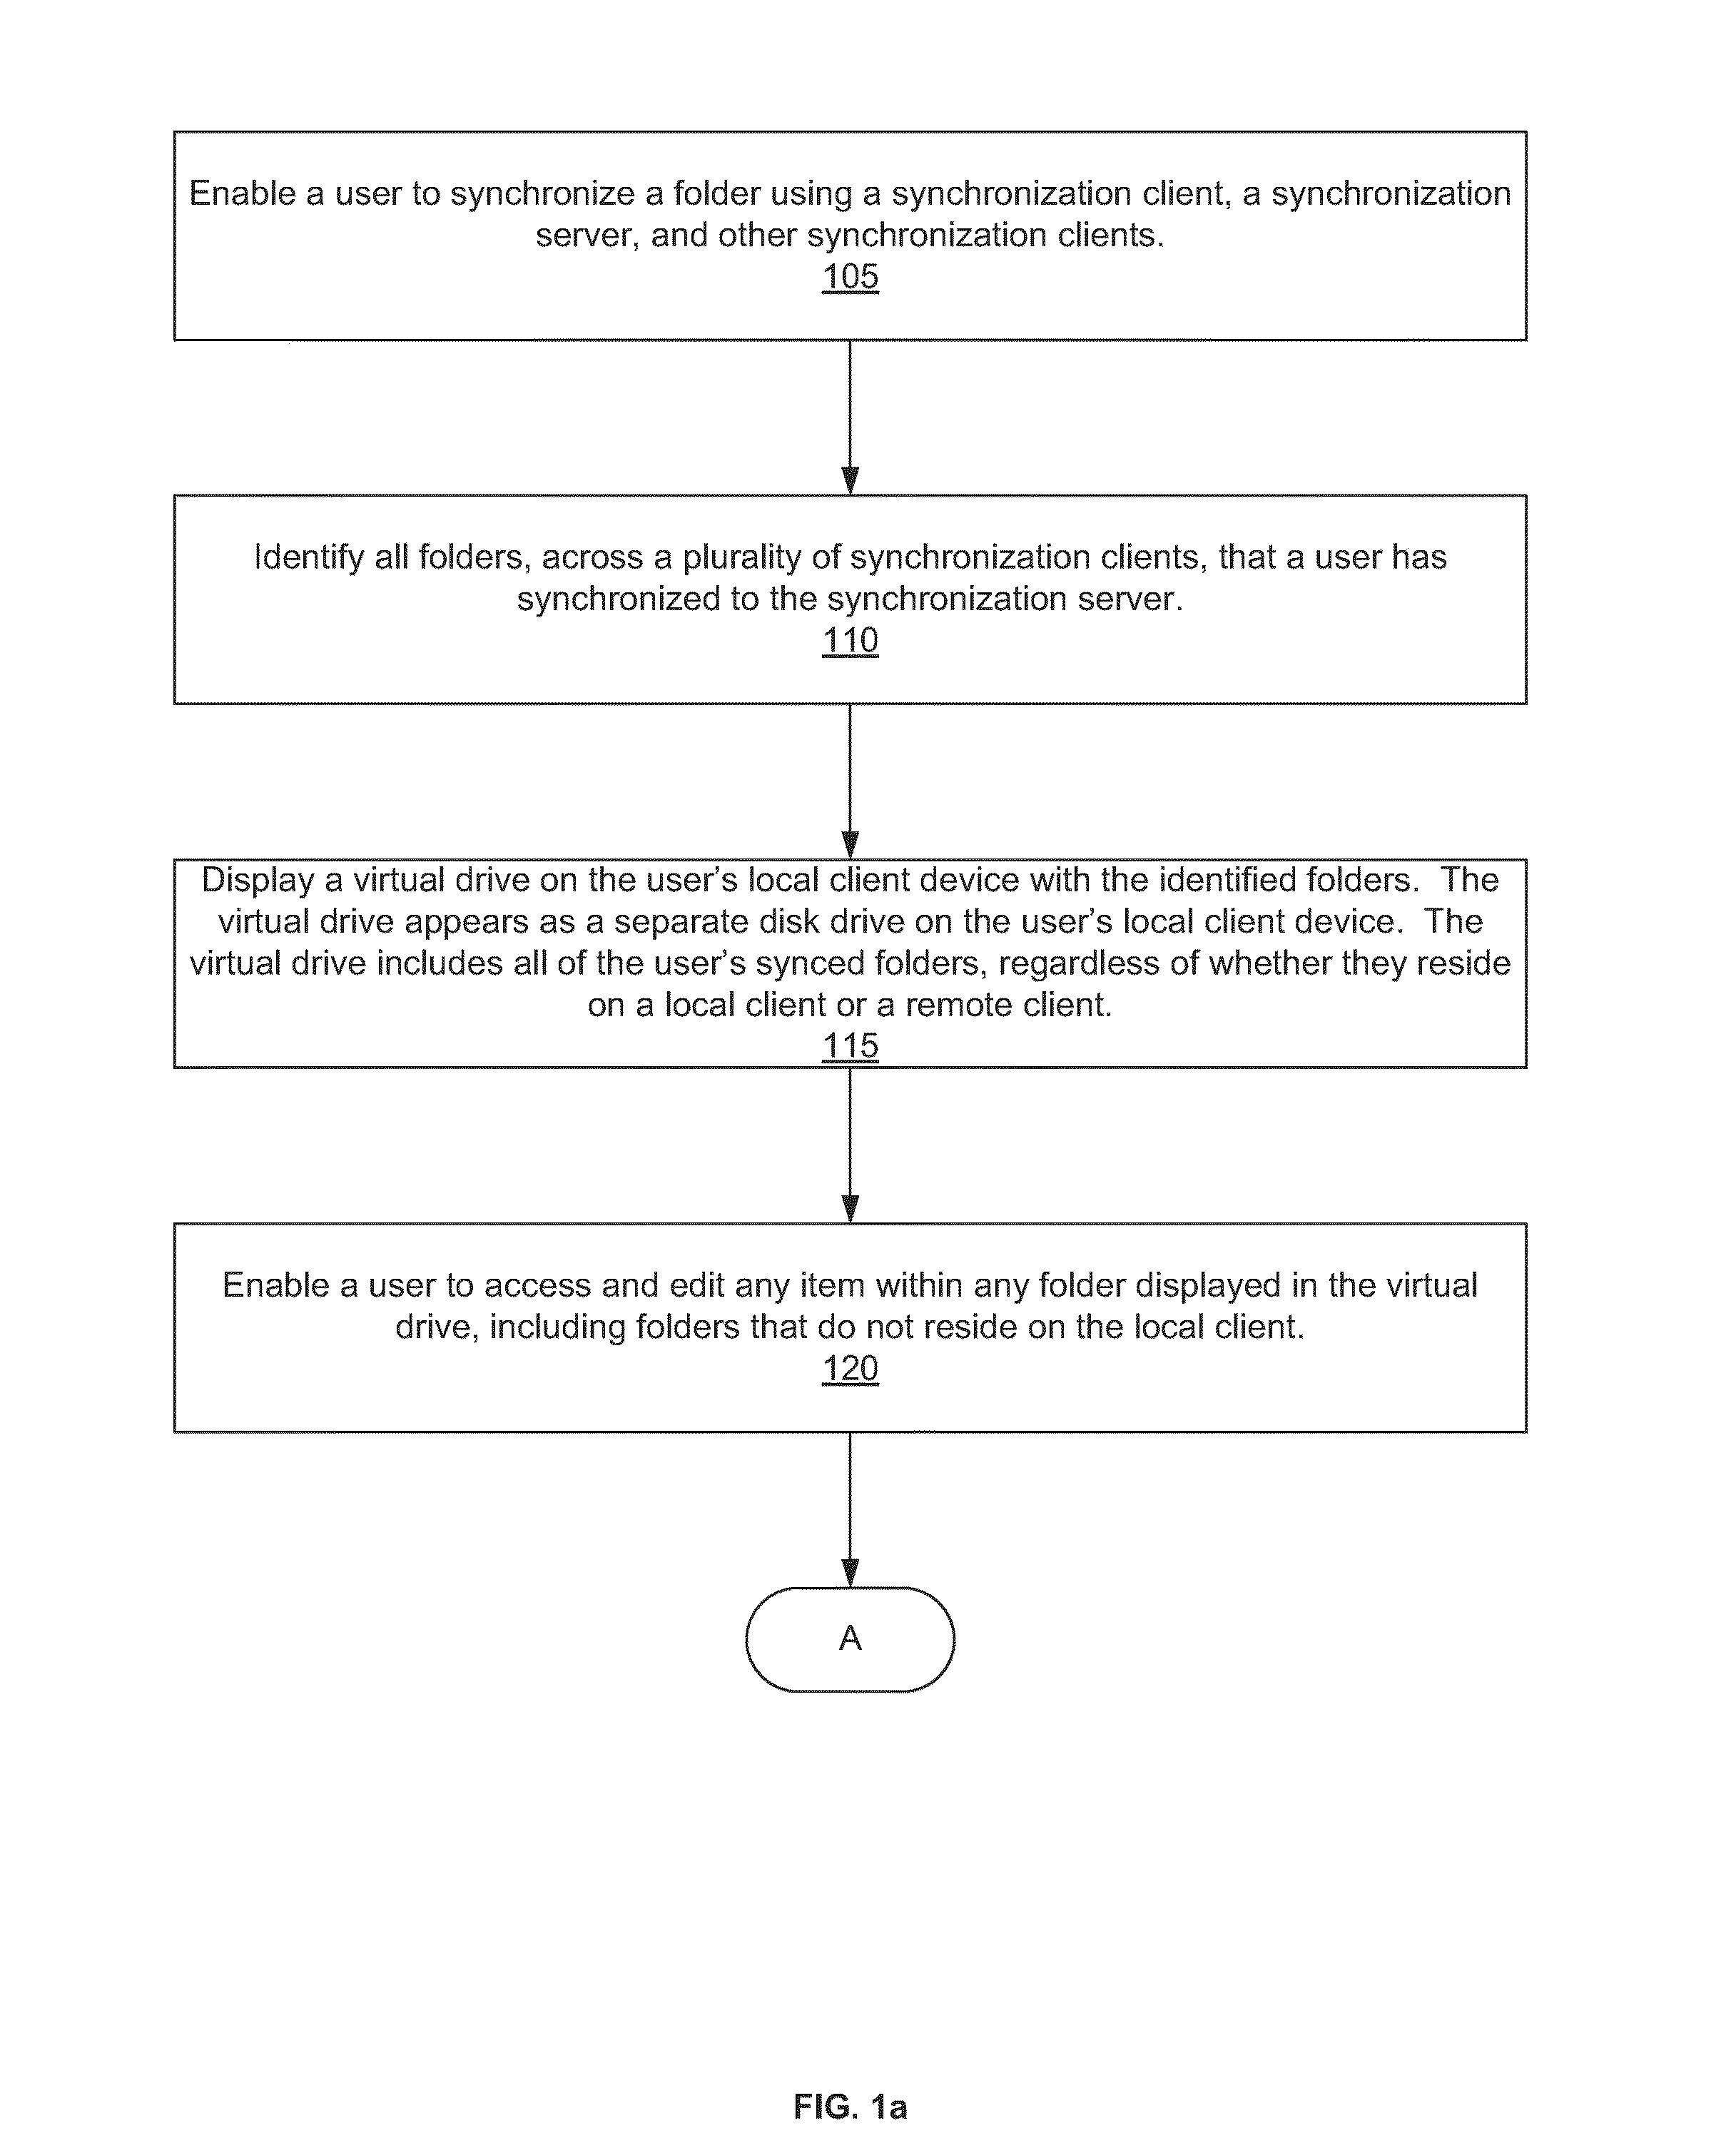 System, method, and computer program for enabling a user to access and edit via a virtual drive objects synchronized to a plurality of synchronization clients